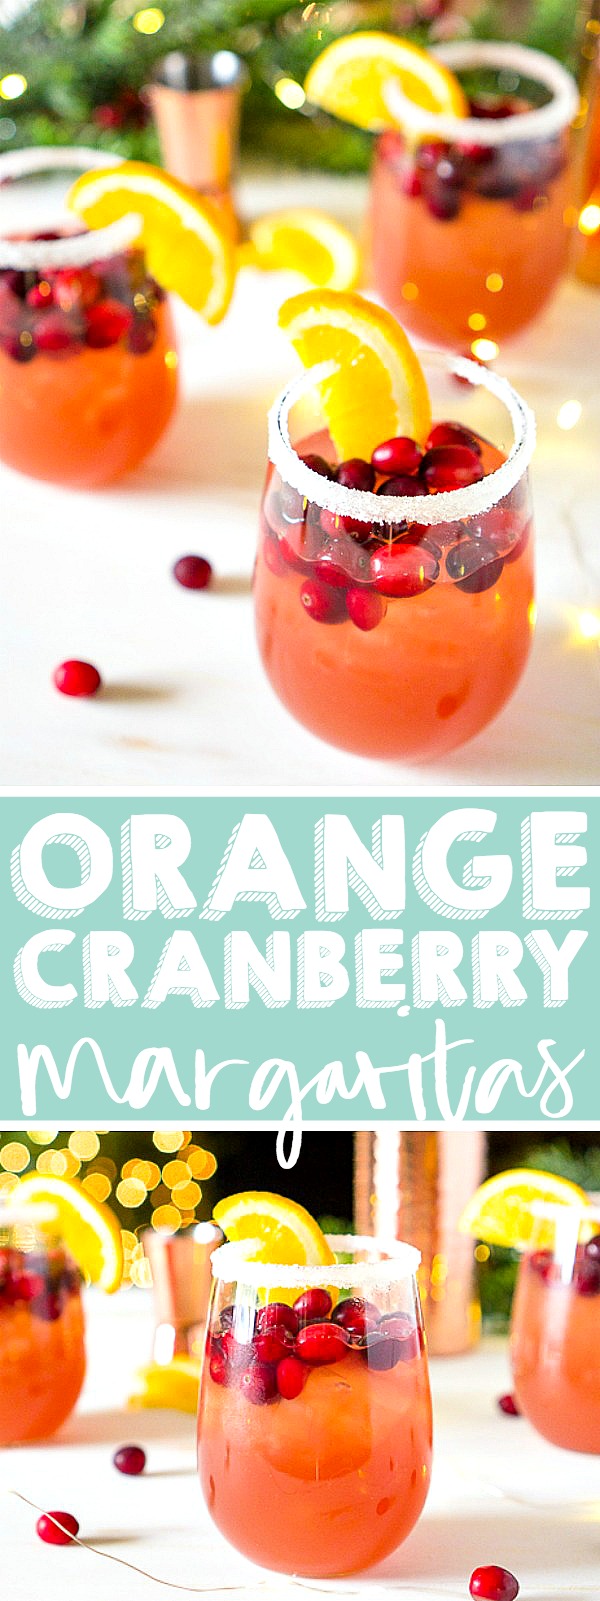 Sip on this Orange Cranberry Margarita this Holiday Season! With a smooth blend of citrus and cranberry, you have a perfect Christmas Cocktail Recipe at your fingertips! | THE LOVE NERDS #christmascocktail #holdiaycocktail #cranberrycocktail 